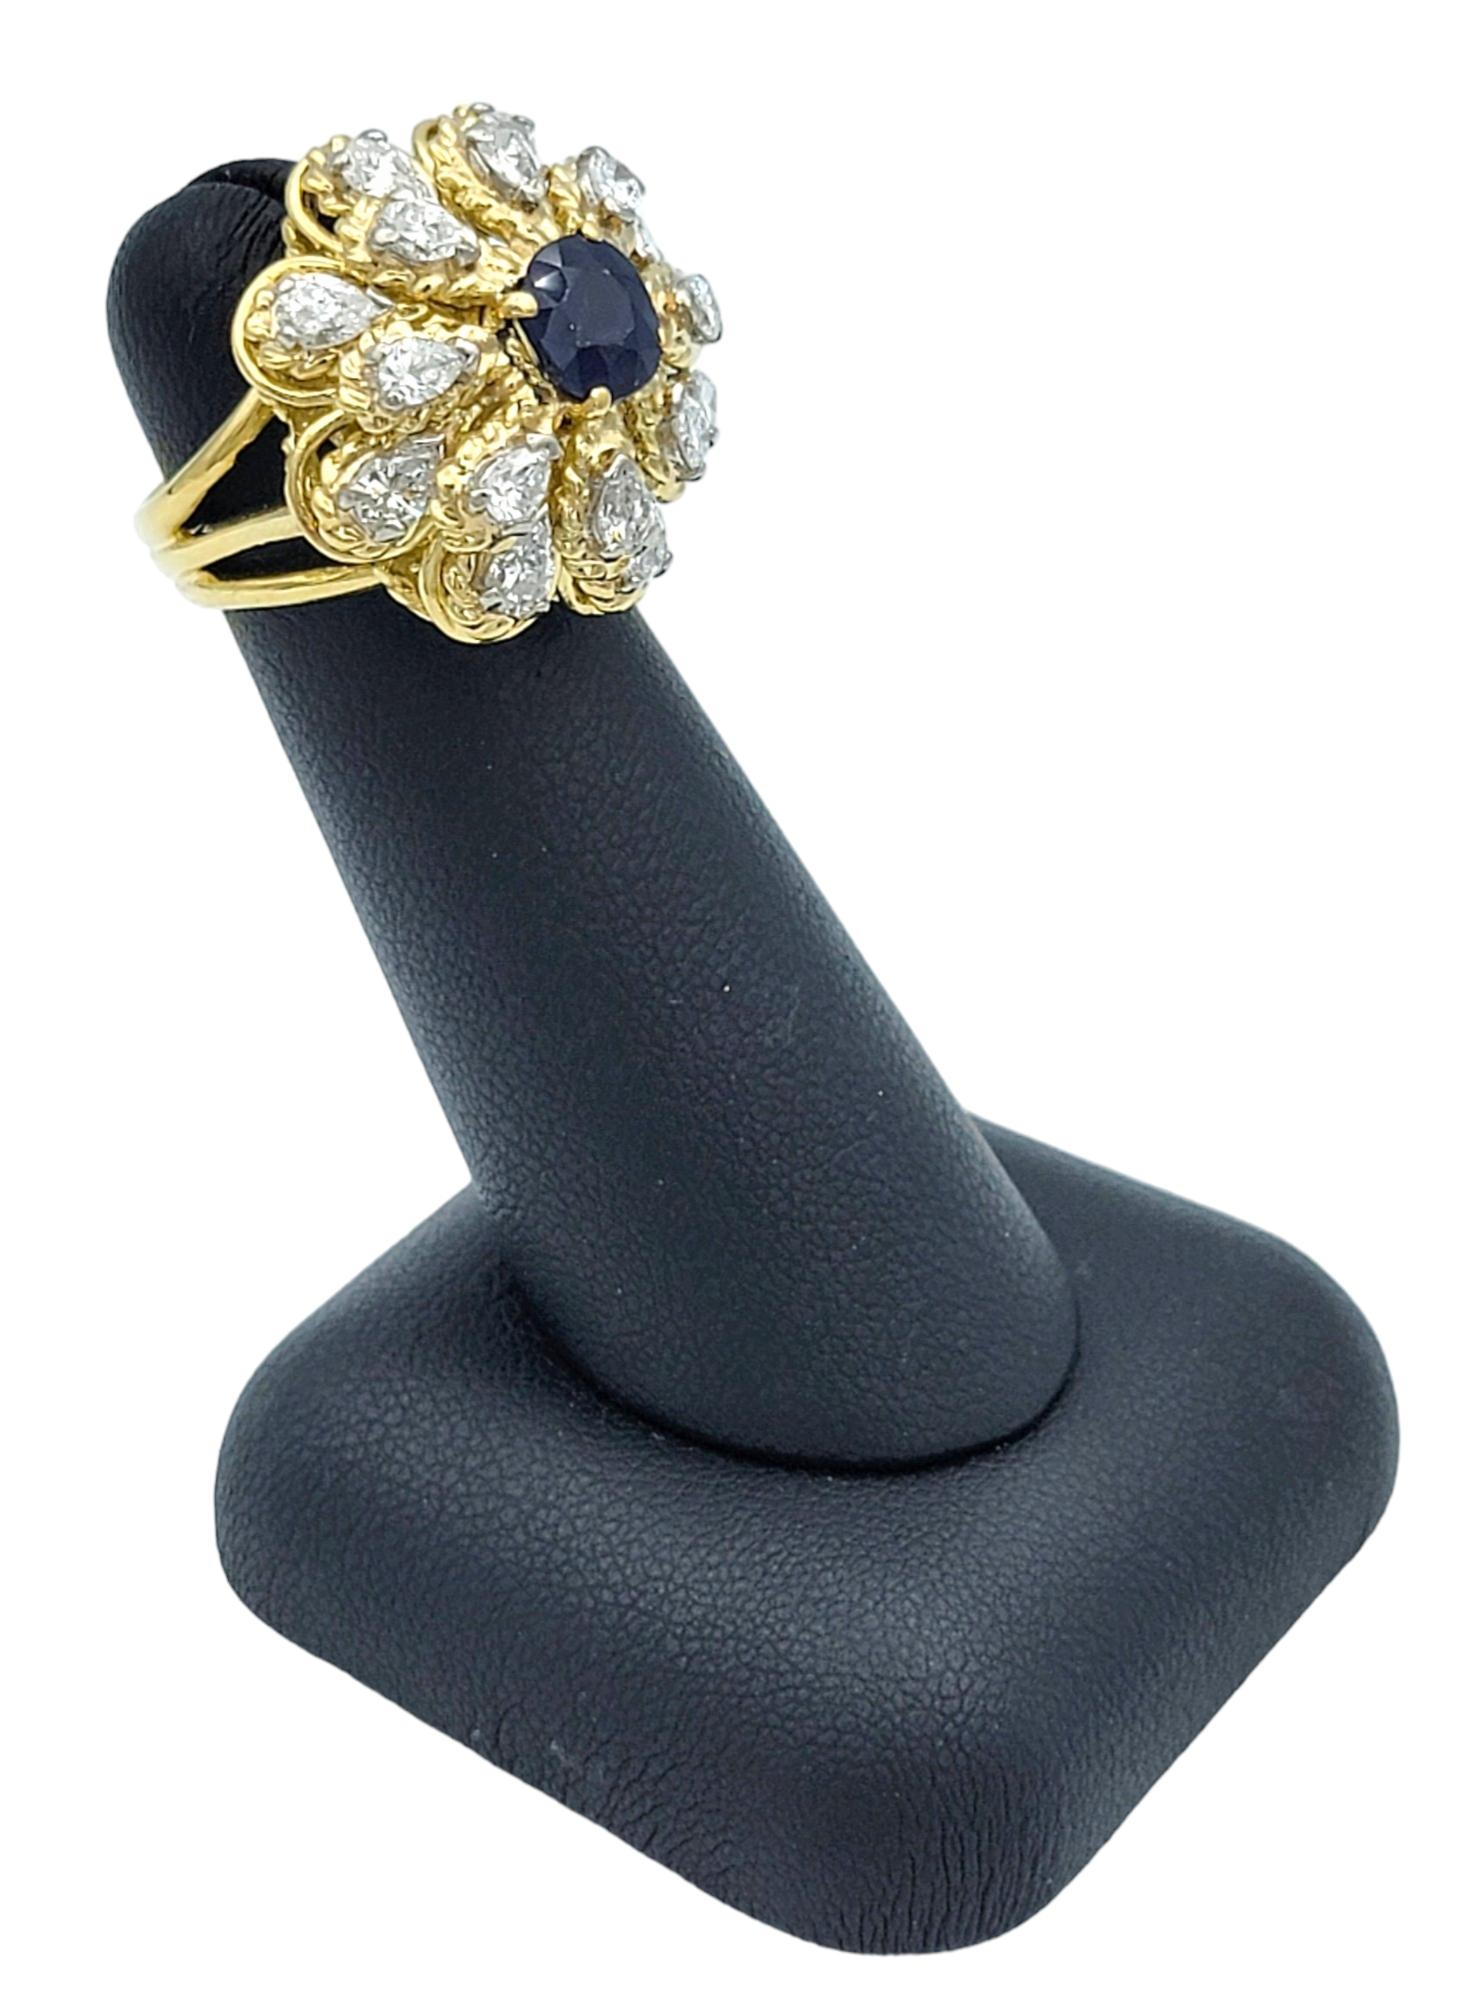 Vintage Sapphire and Diamond Flower Design Dome Ring Set in 18 Karat Yellow Gold For Sale 2